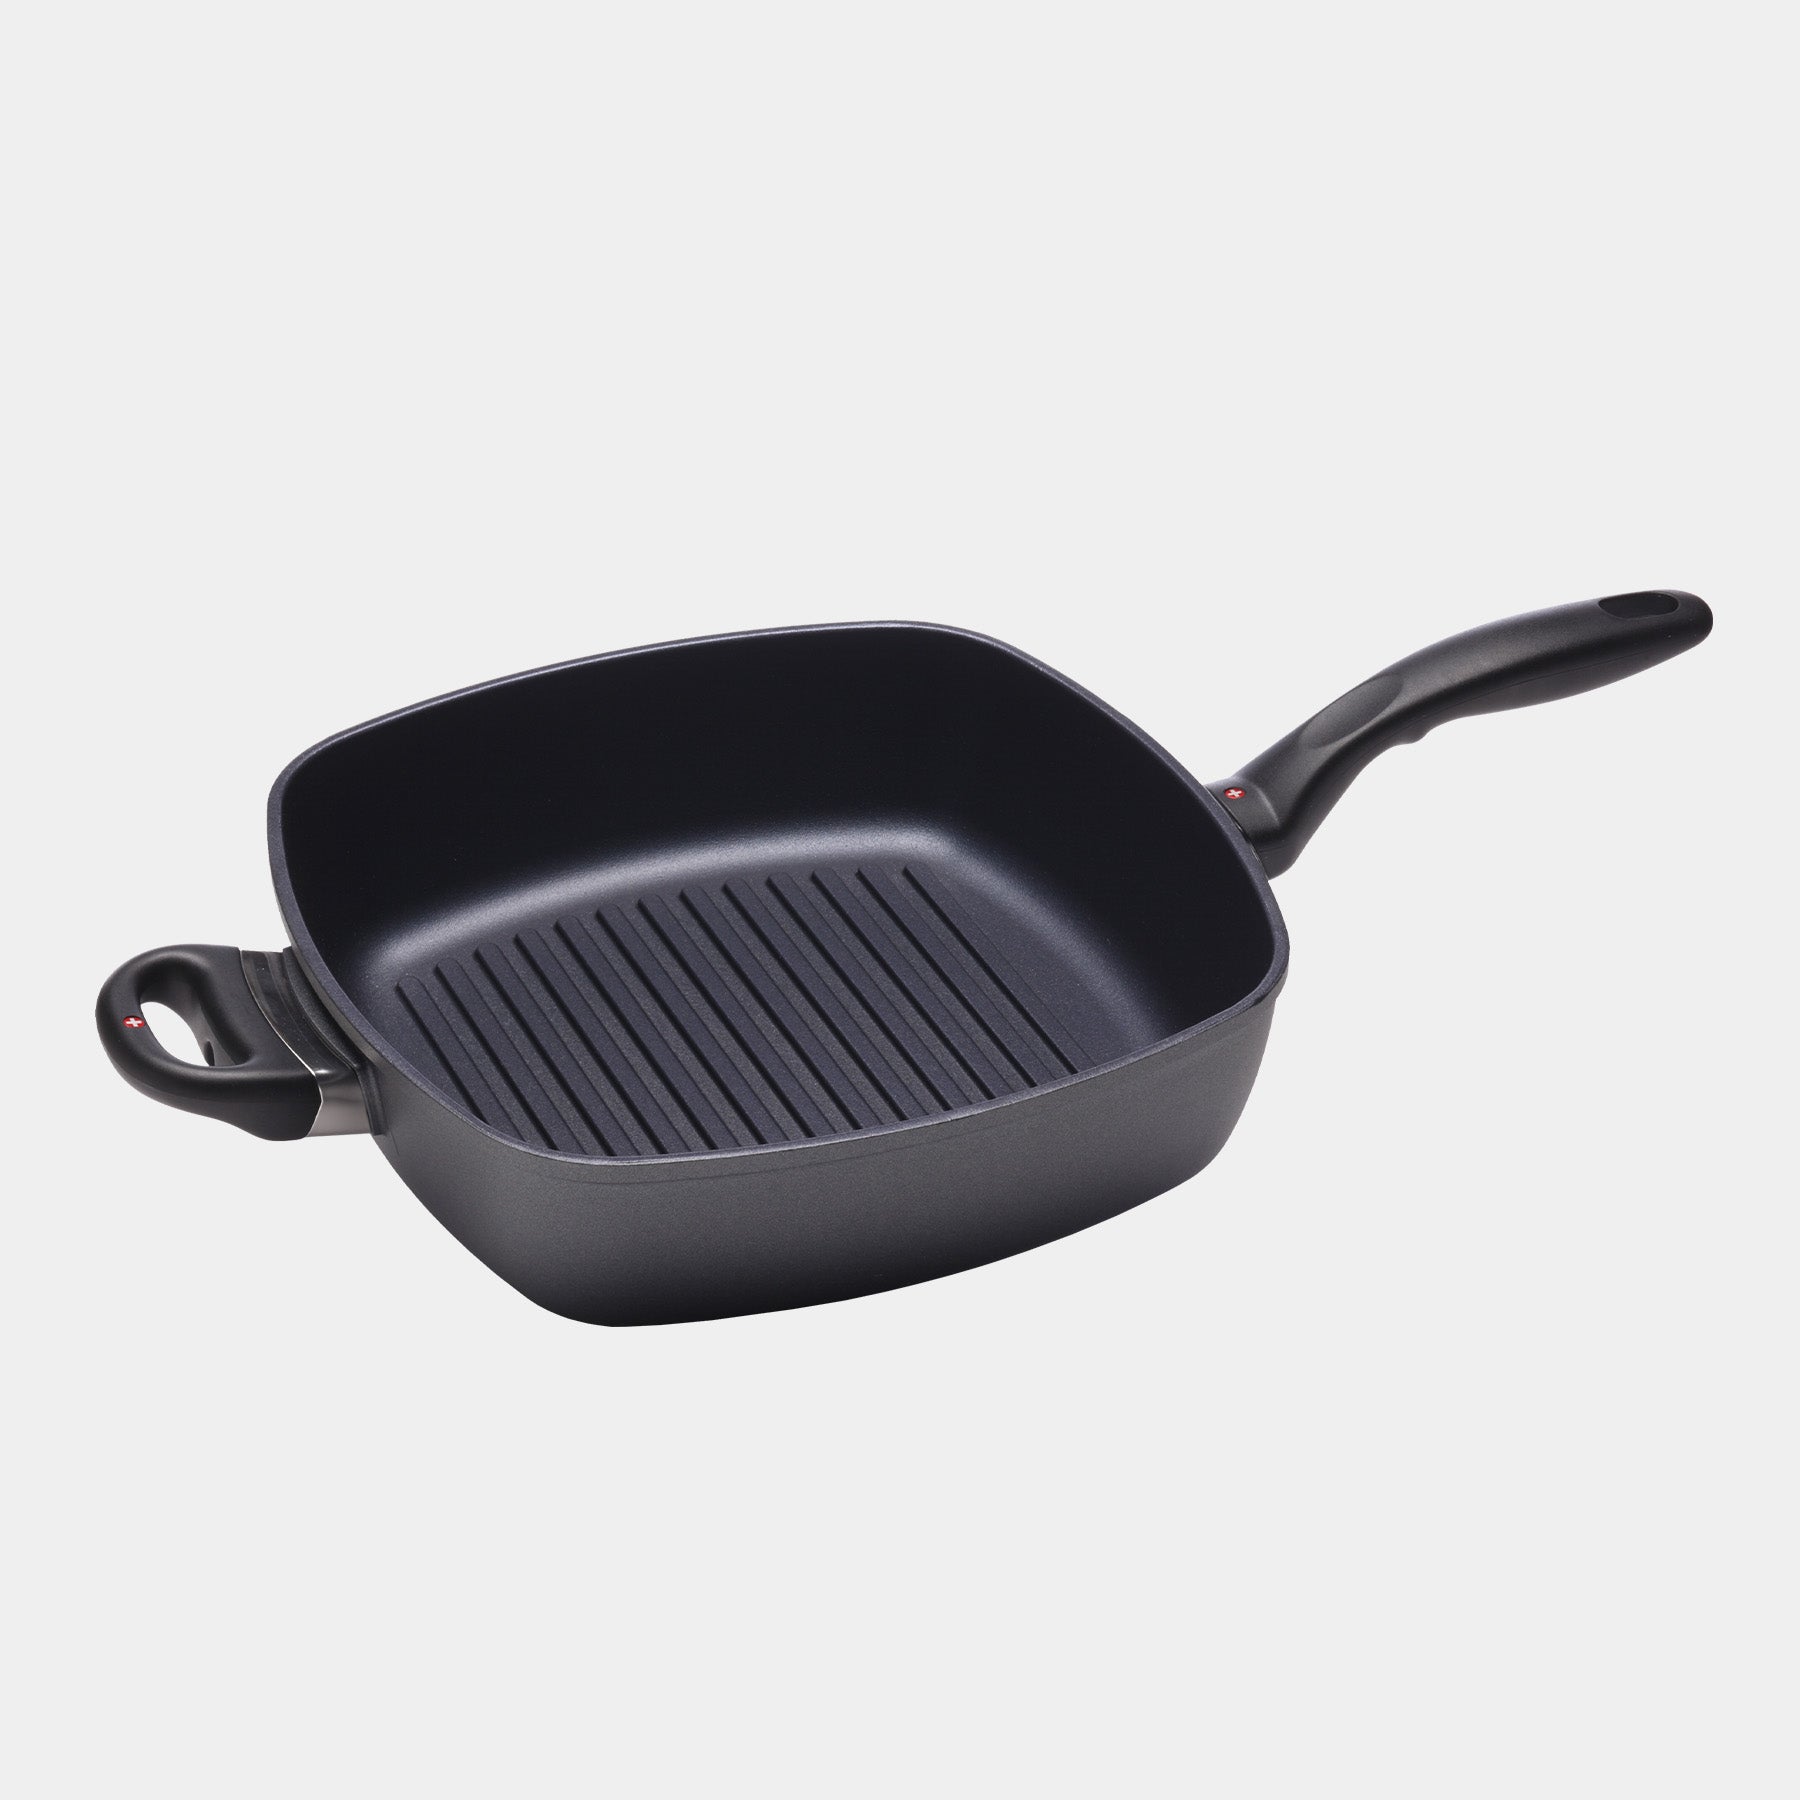 HD Nonstick 11" x 11" Deep Square Grill Pan - Induction